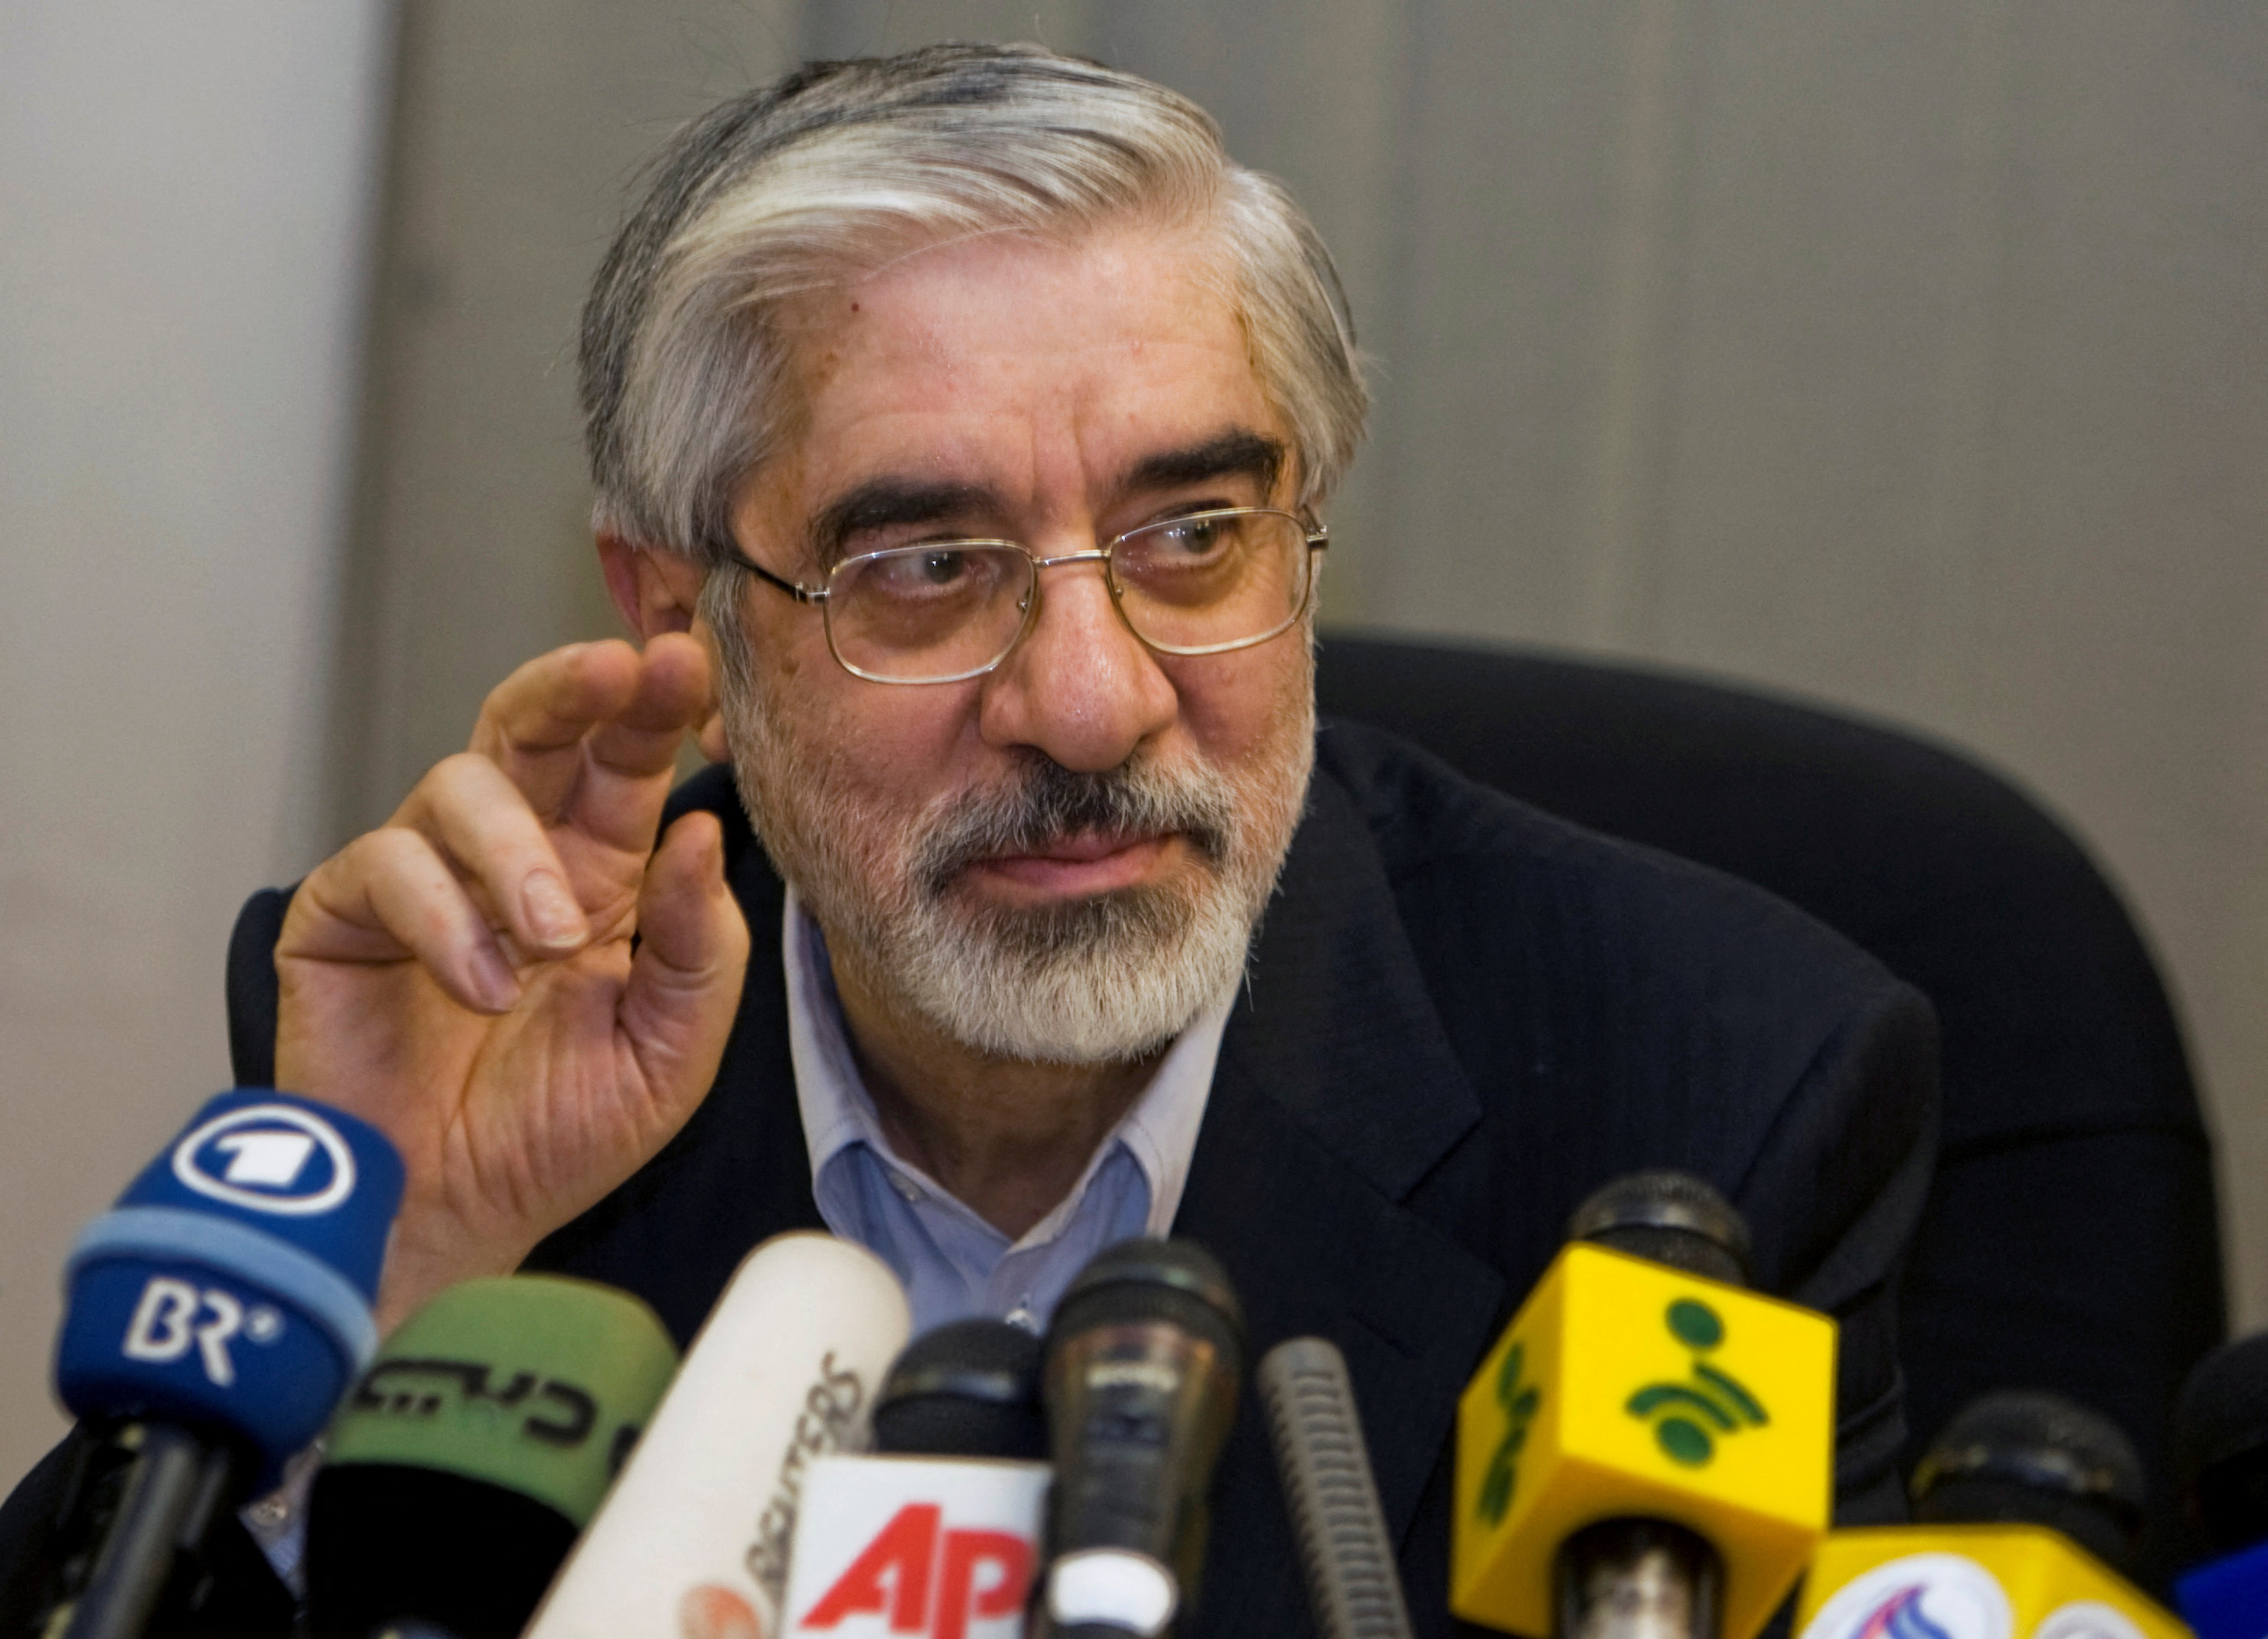 Iran's presidential election candidate Mirhossein Mousavi speaks during news conference in Tehran